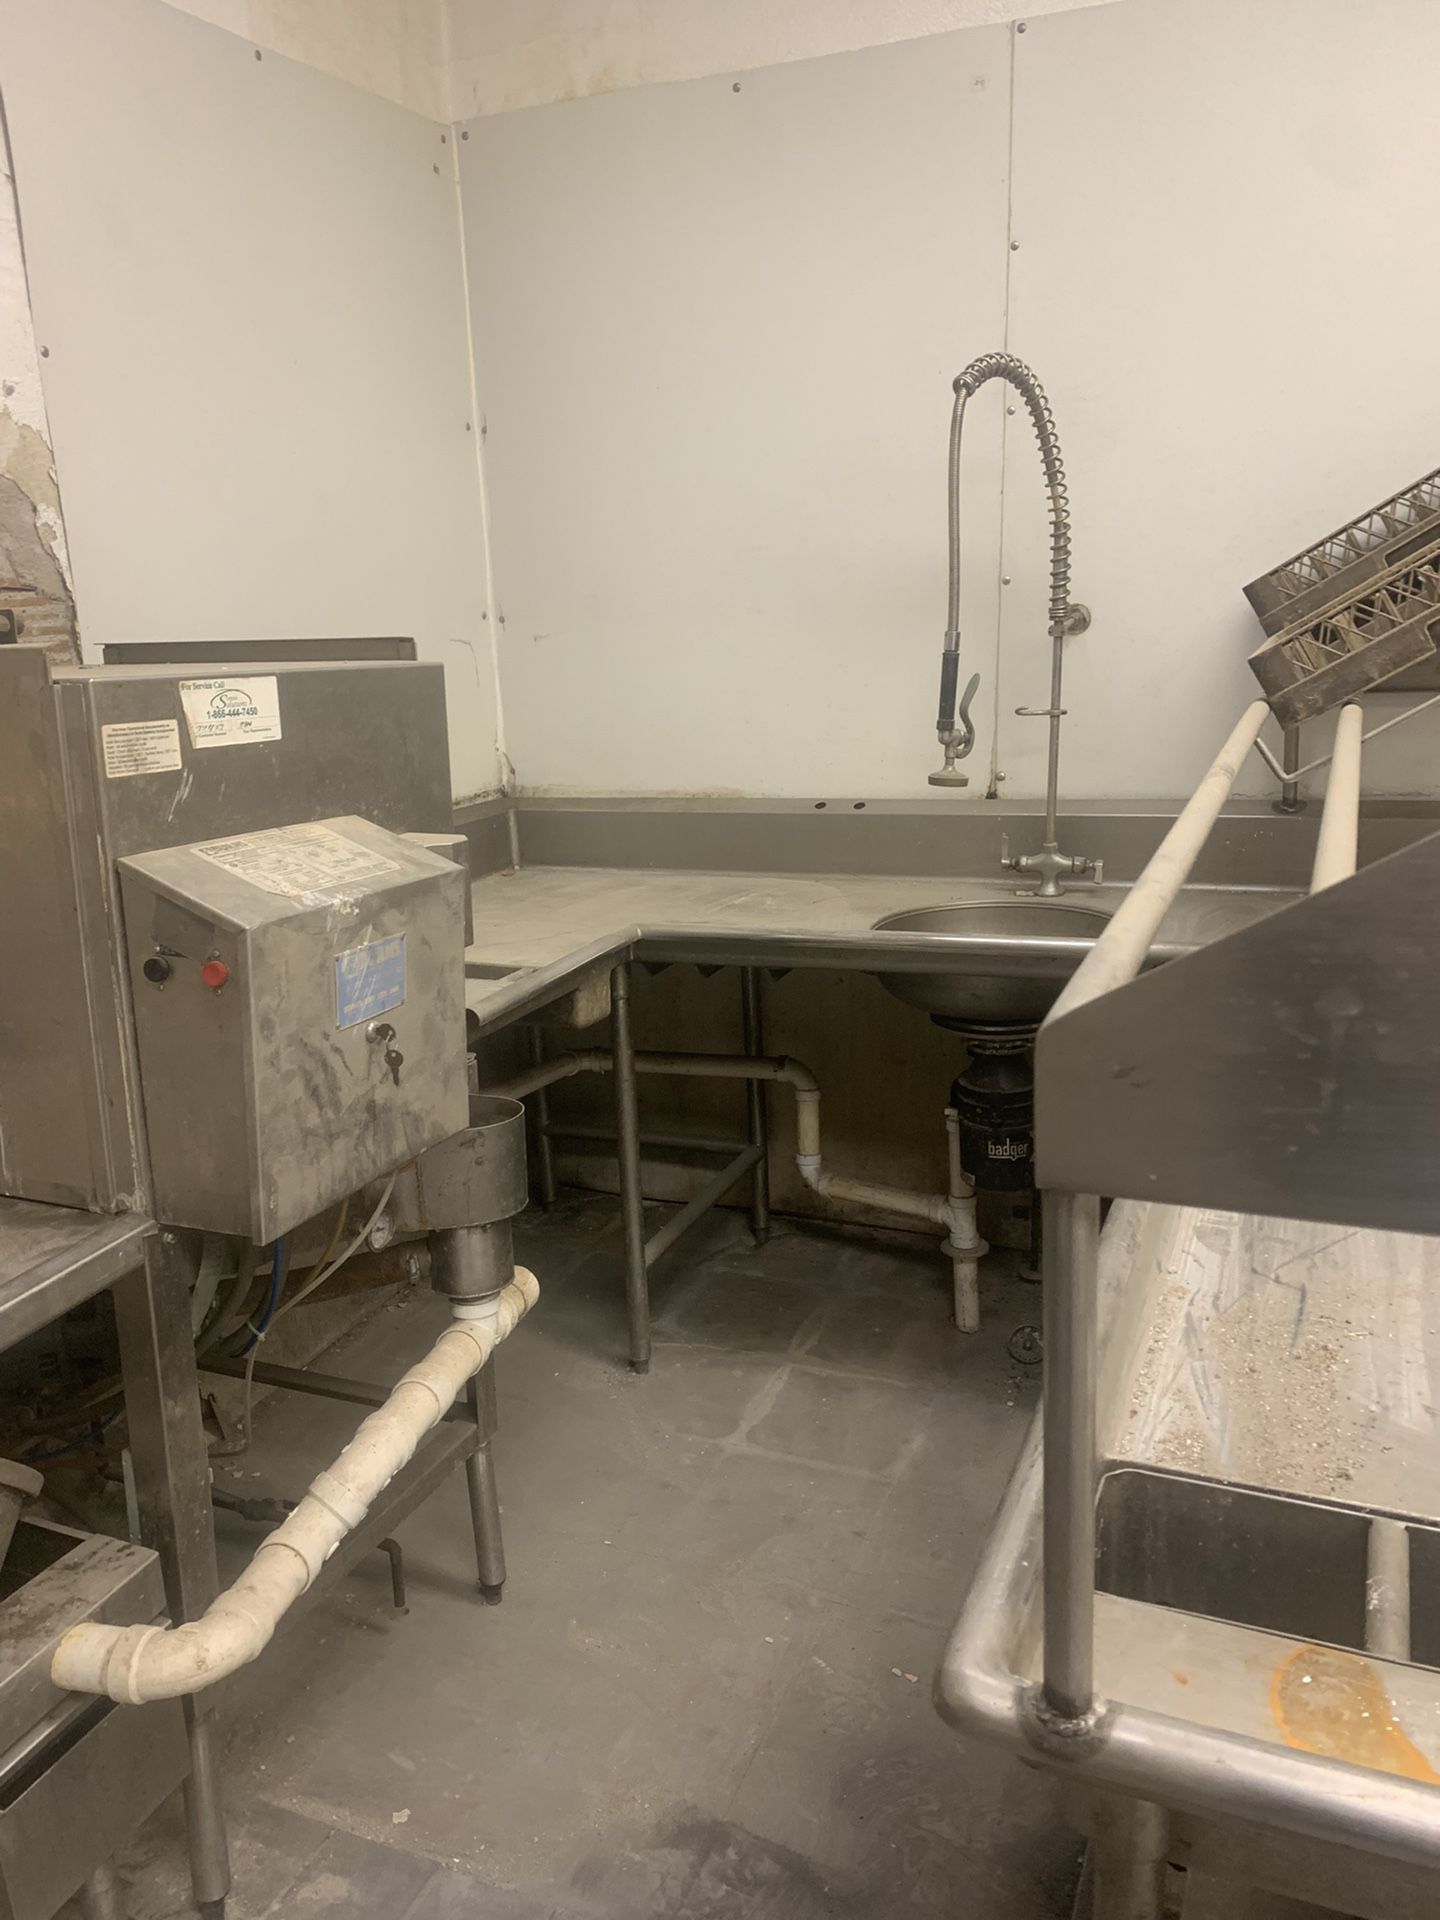 Commercial Dishwasher Table And Drying Rack